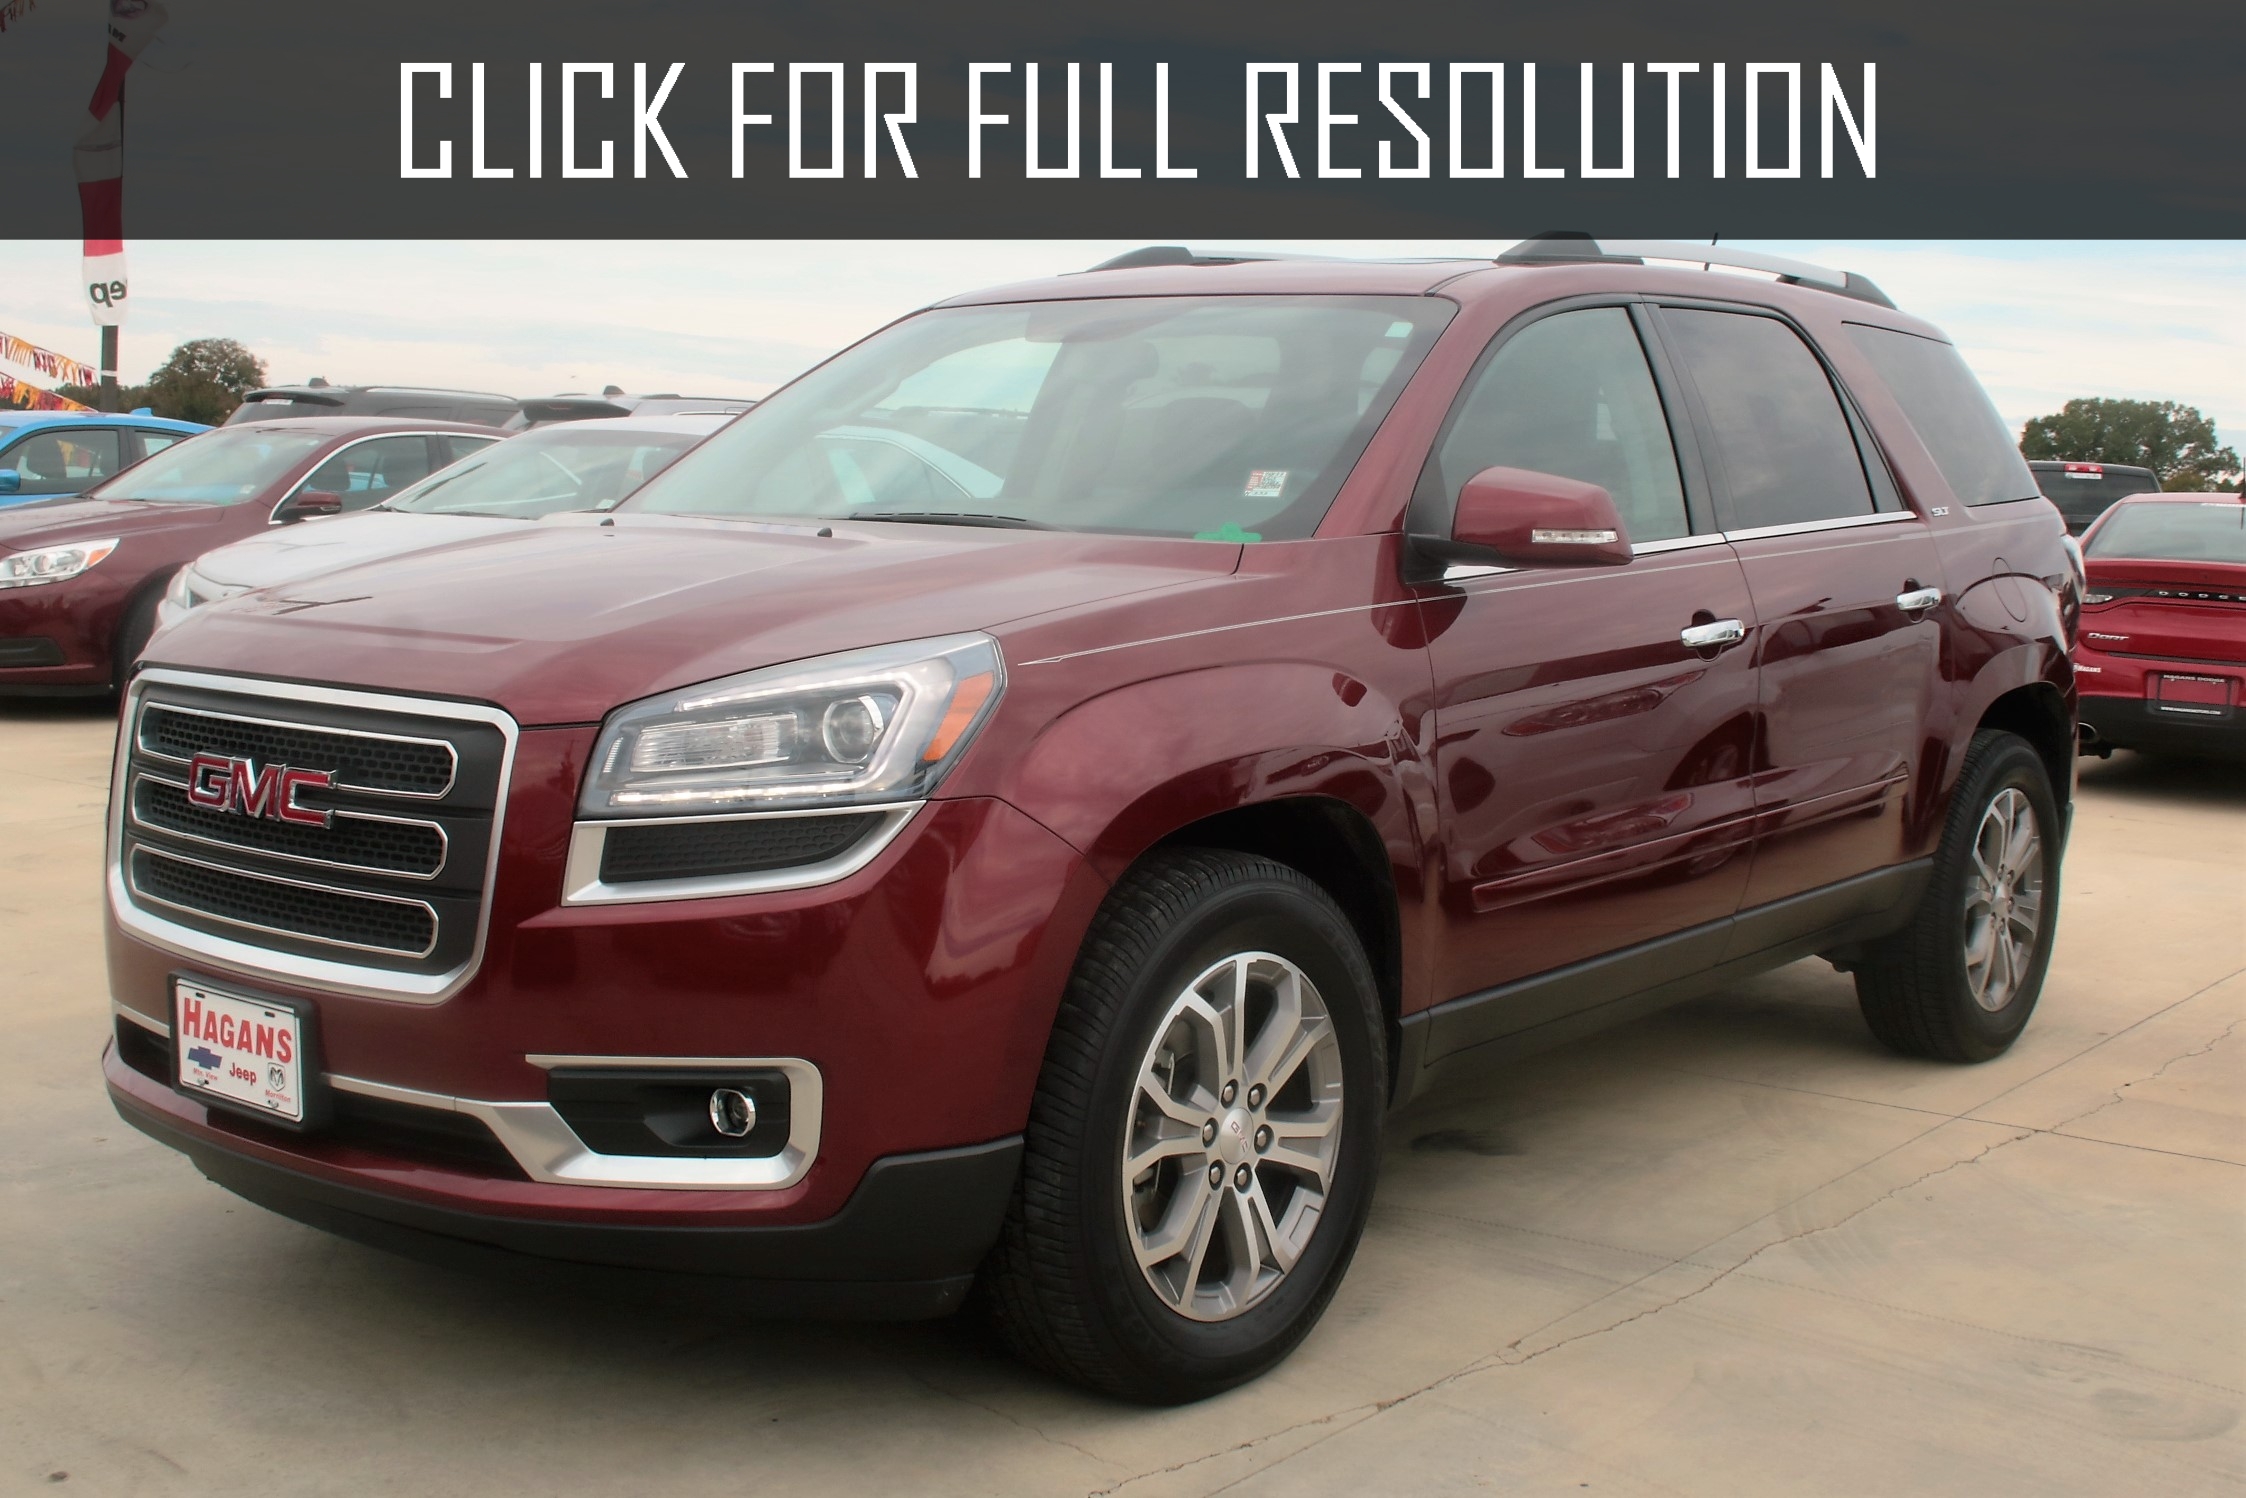 2015 Gmc Acadia Slt News Reviews Msrp Ratings With Amazing Images